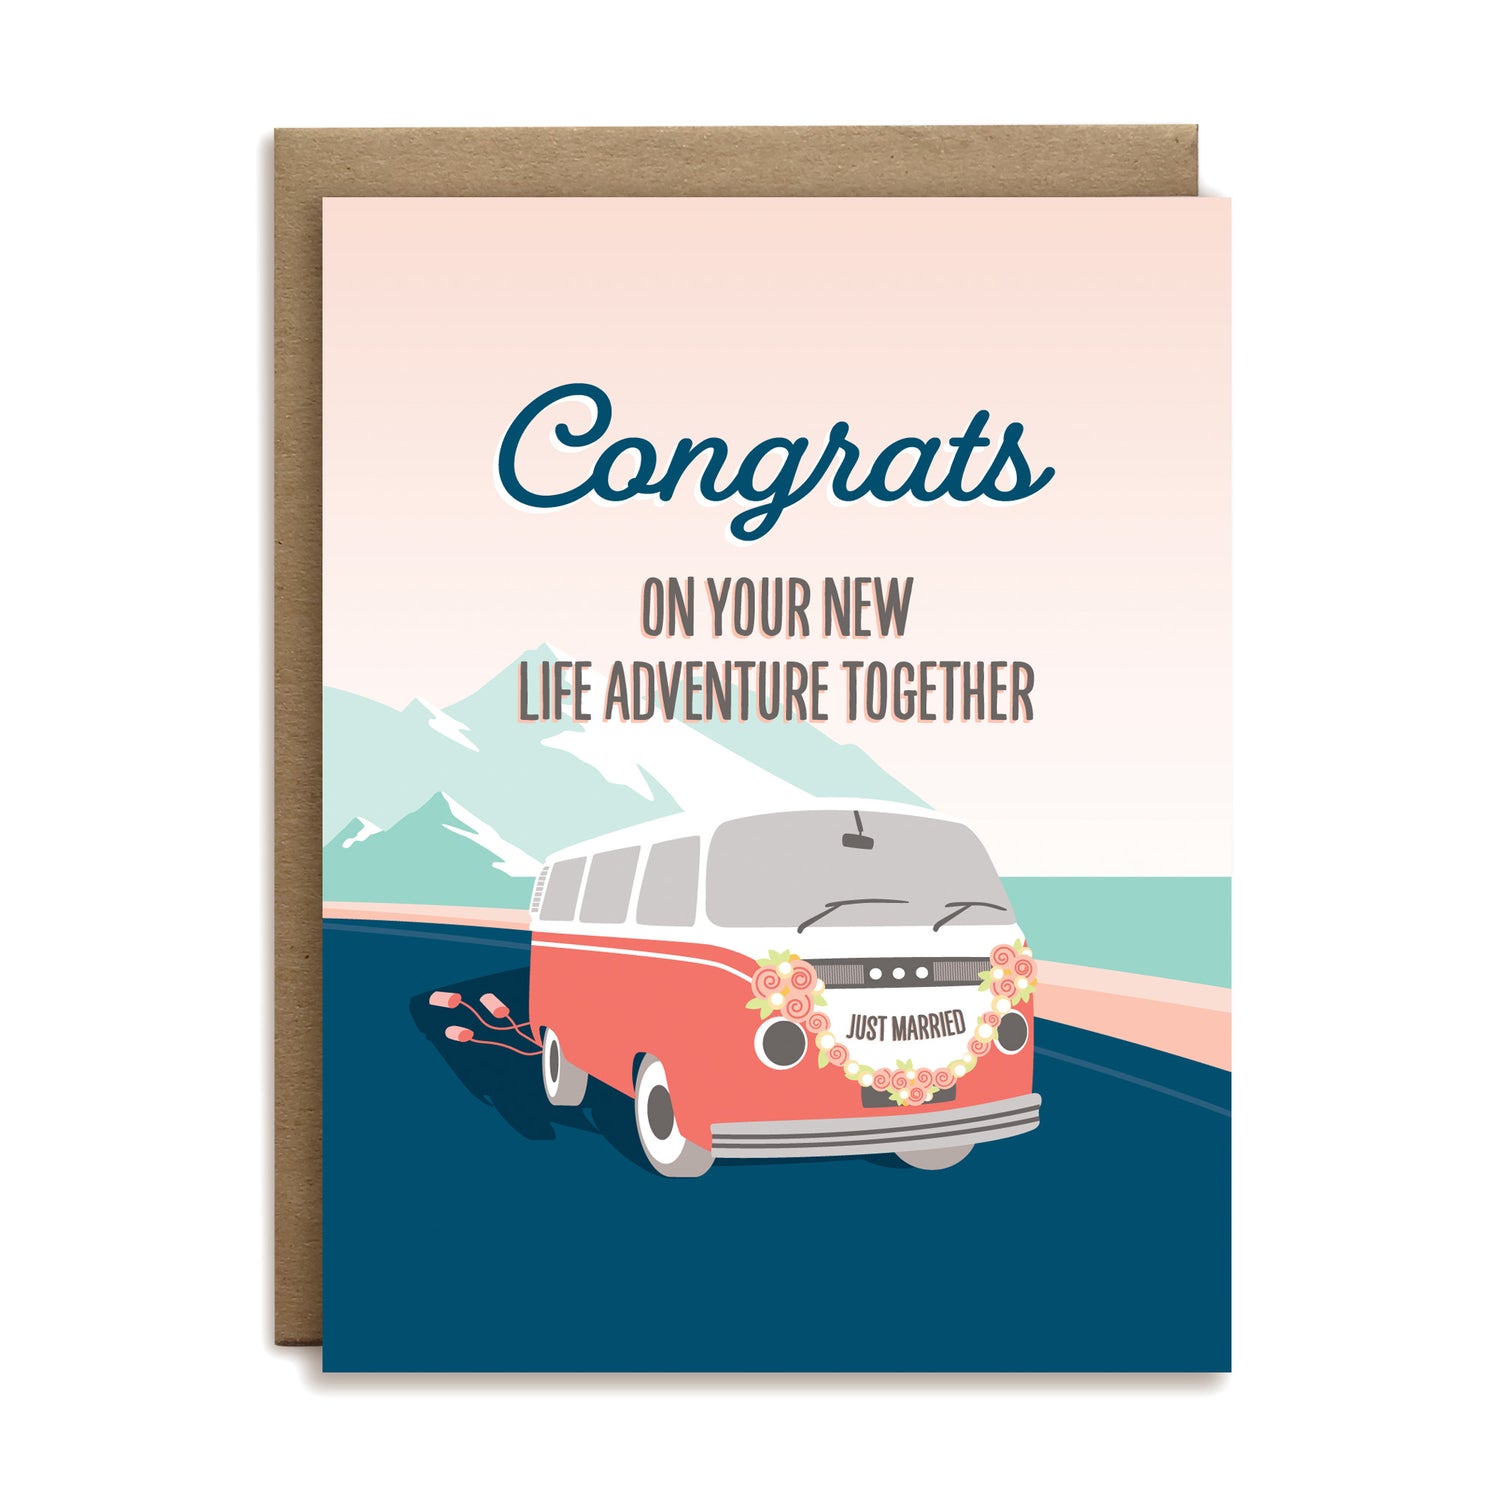 Congrats on your new life adventure wedding greeting card by I&